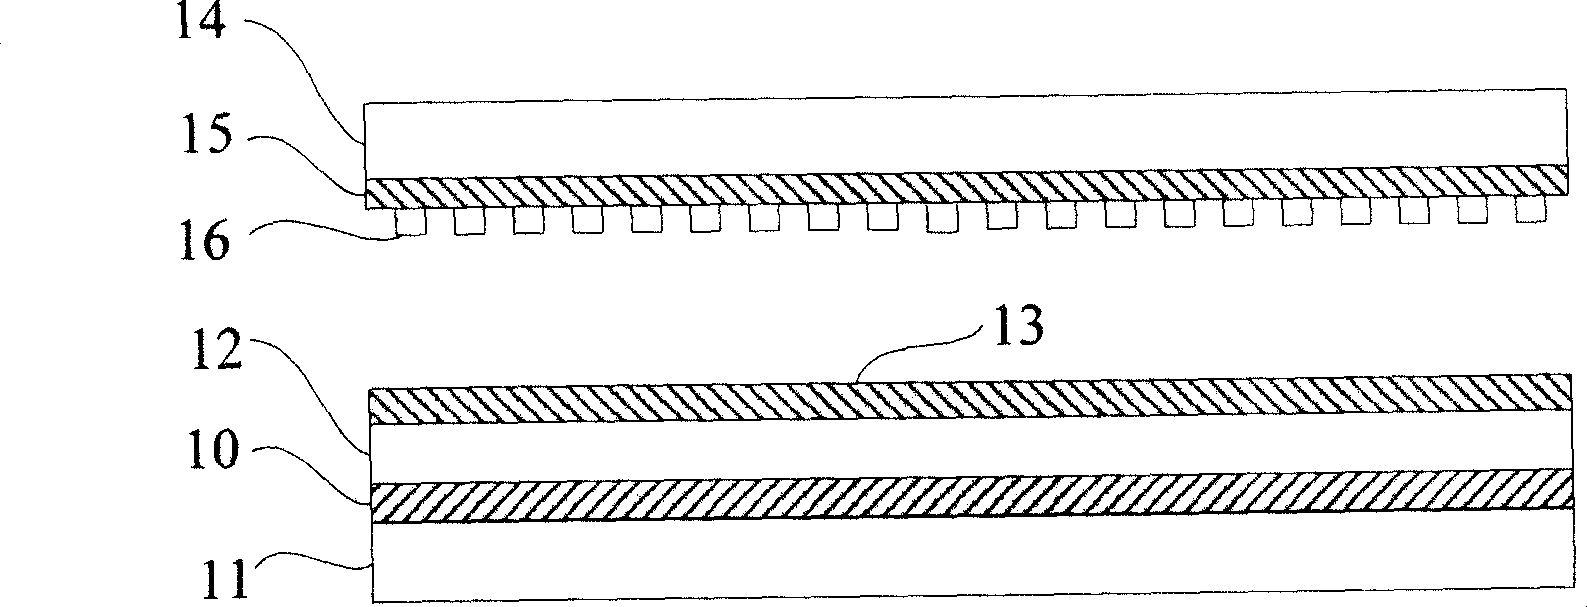 Polymers dispersed liquid crystal light valve and method for making same